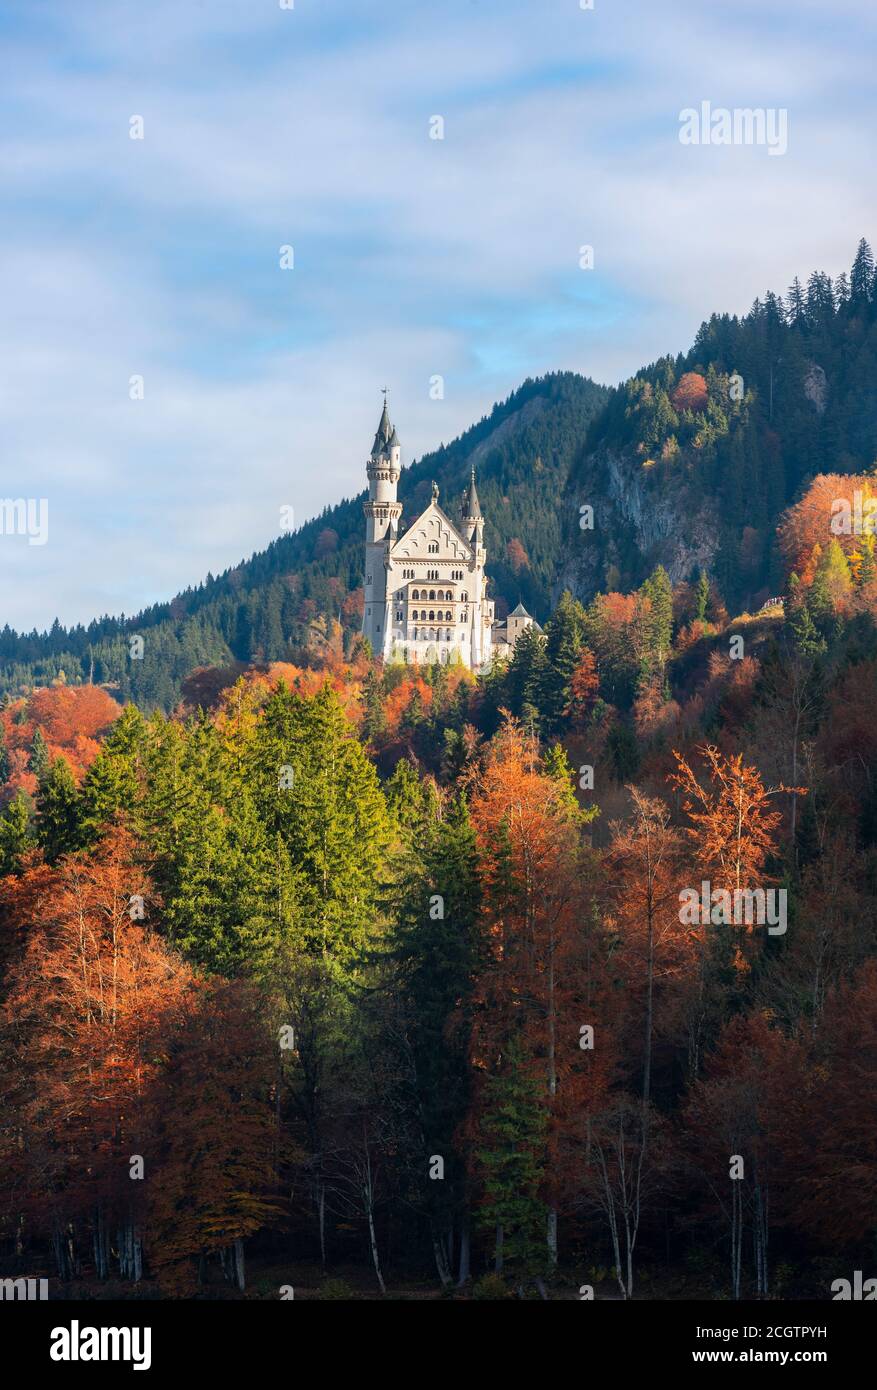 Autumn scenery with colorful trees and the Bavarian Alps mountains, on a sunny day, in Fussen, Germany. Fall landscape with castle and forest. Stock Photo